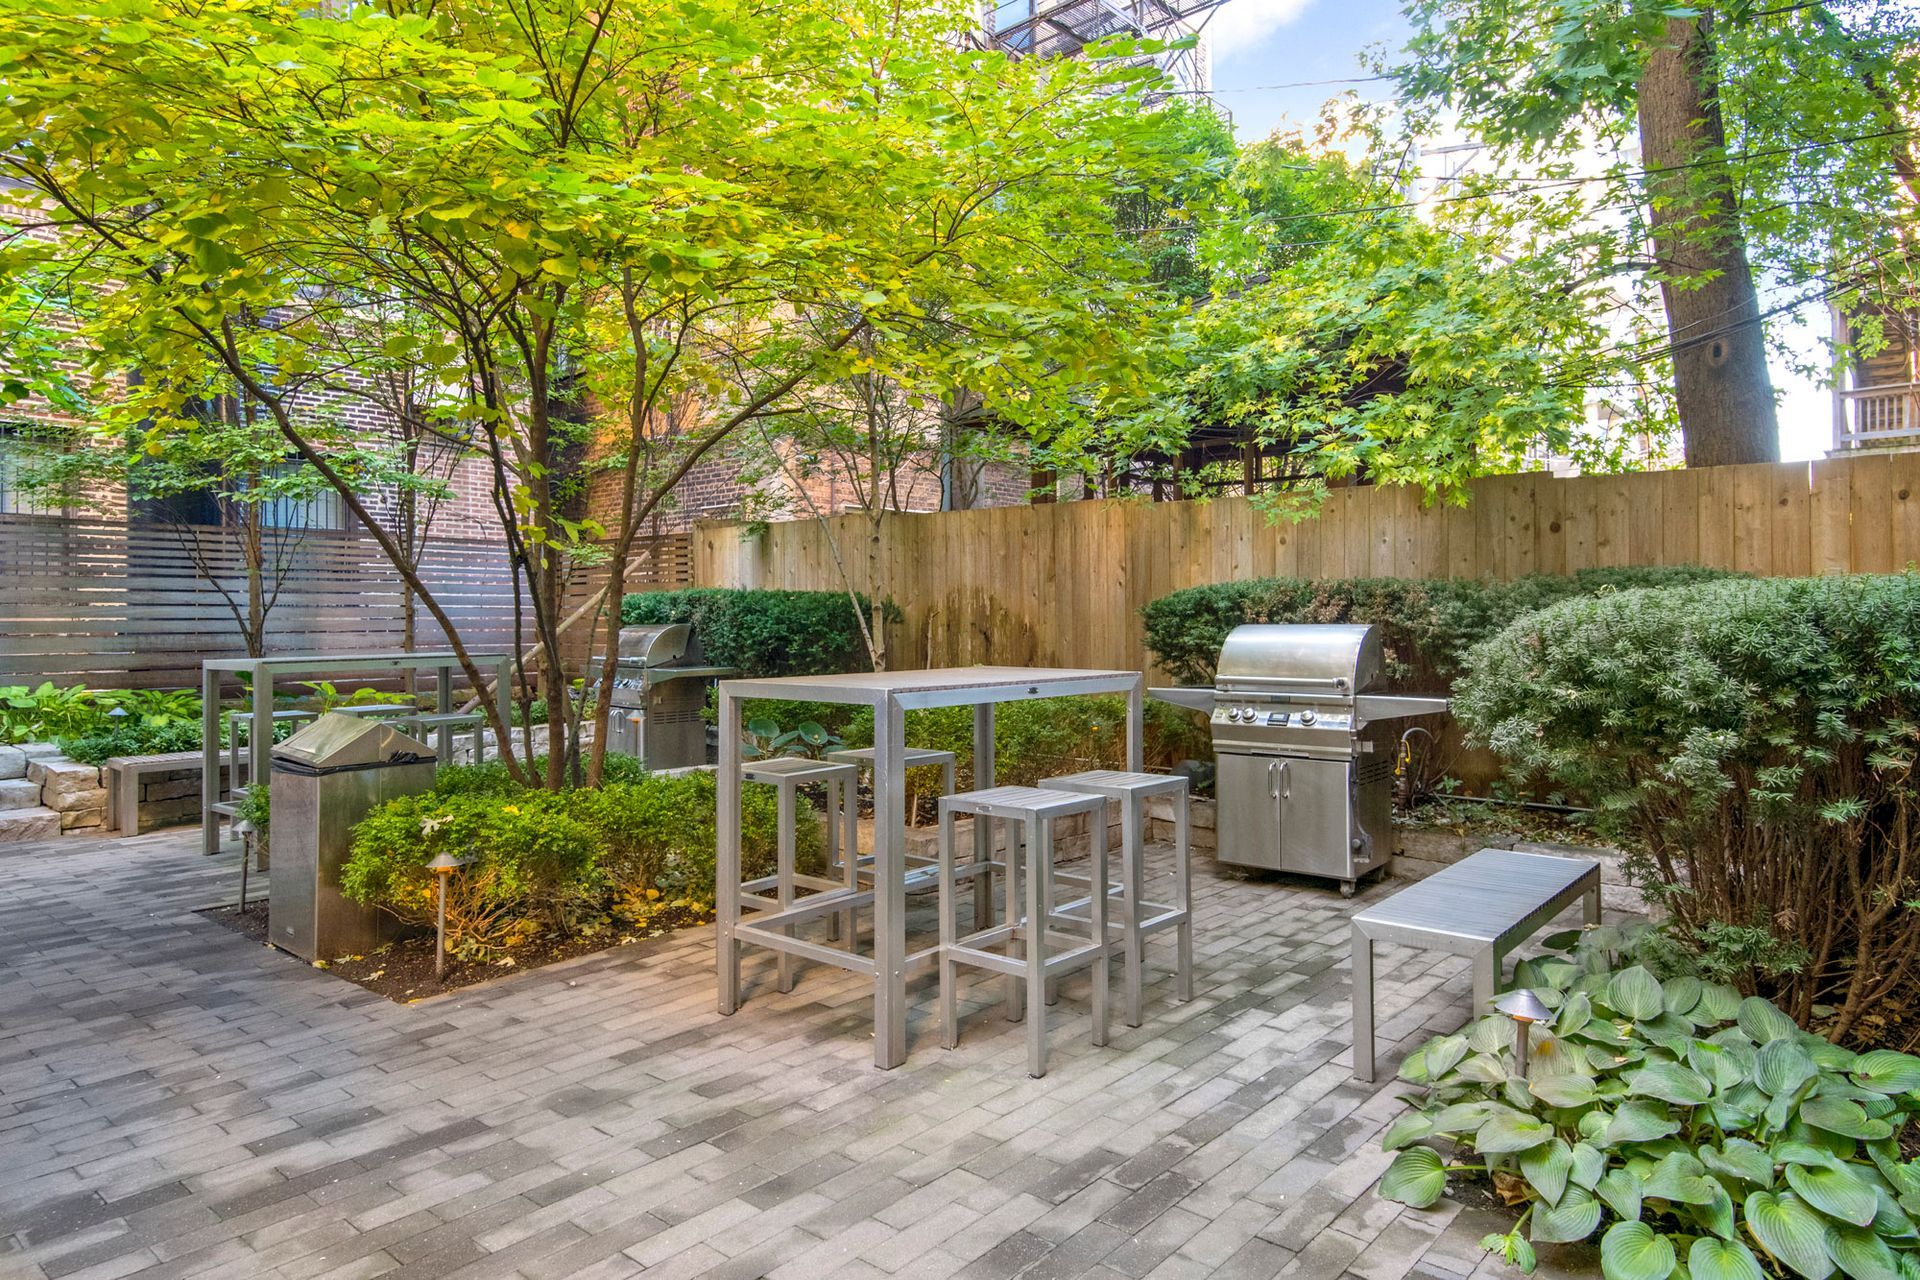 Outdoor area with a grill and tables at 429 W Melrose Street.